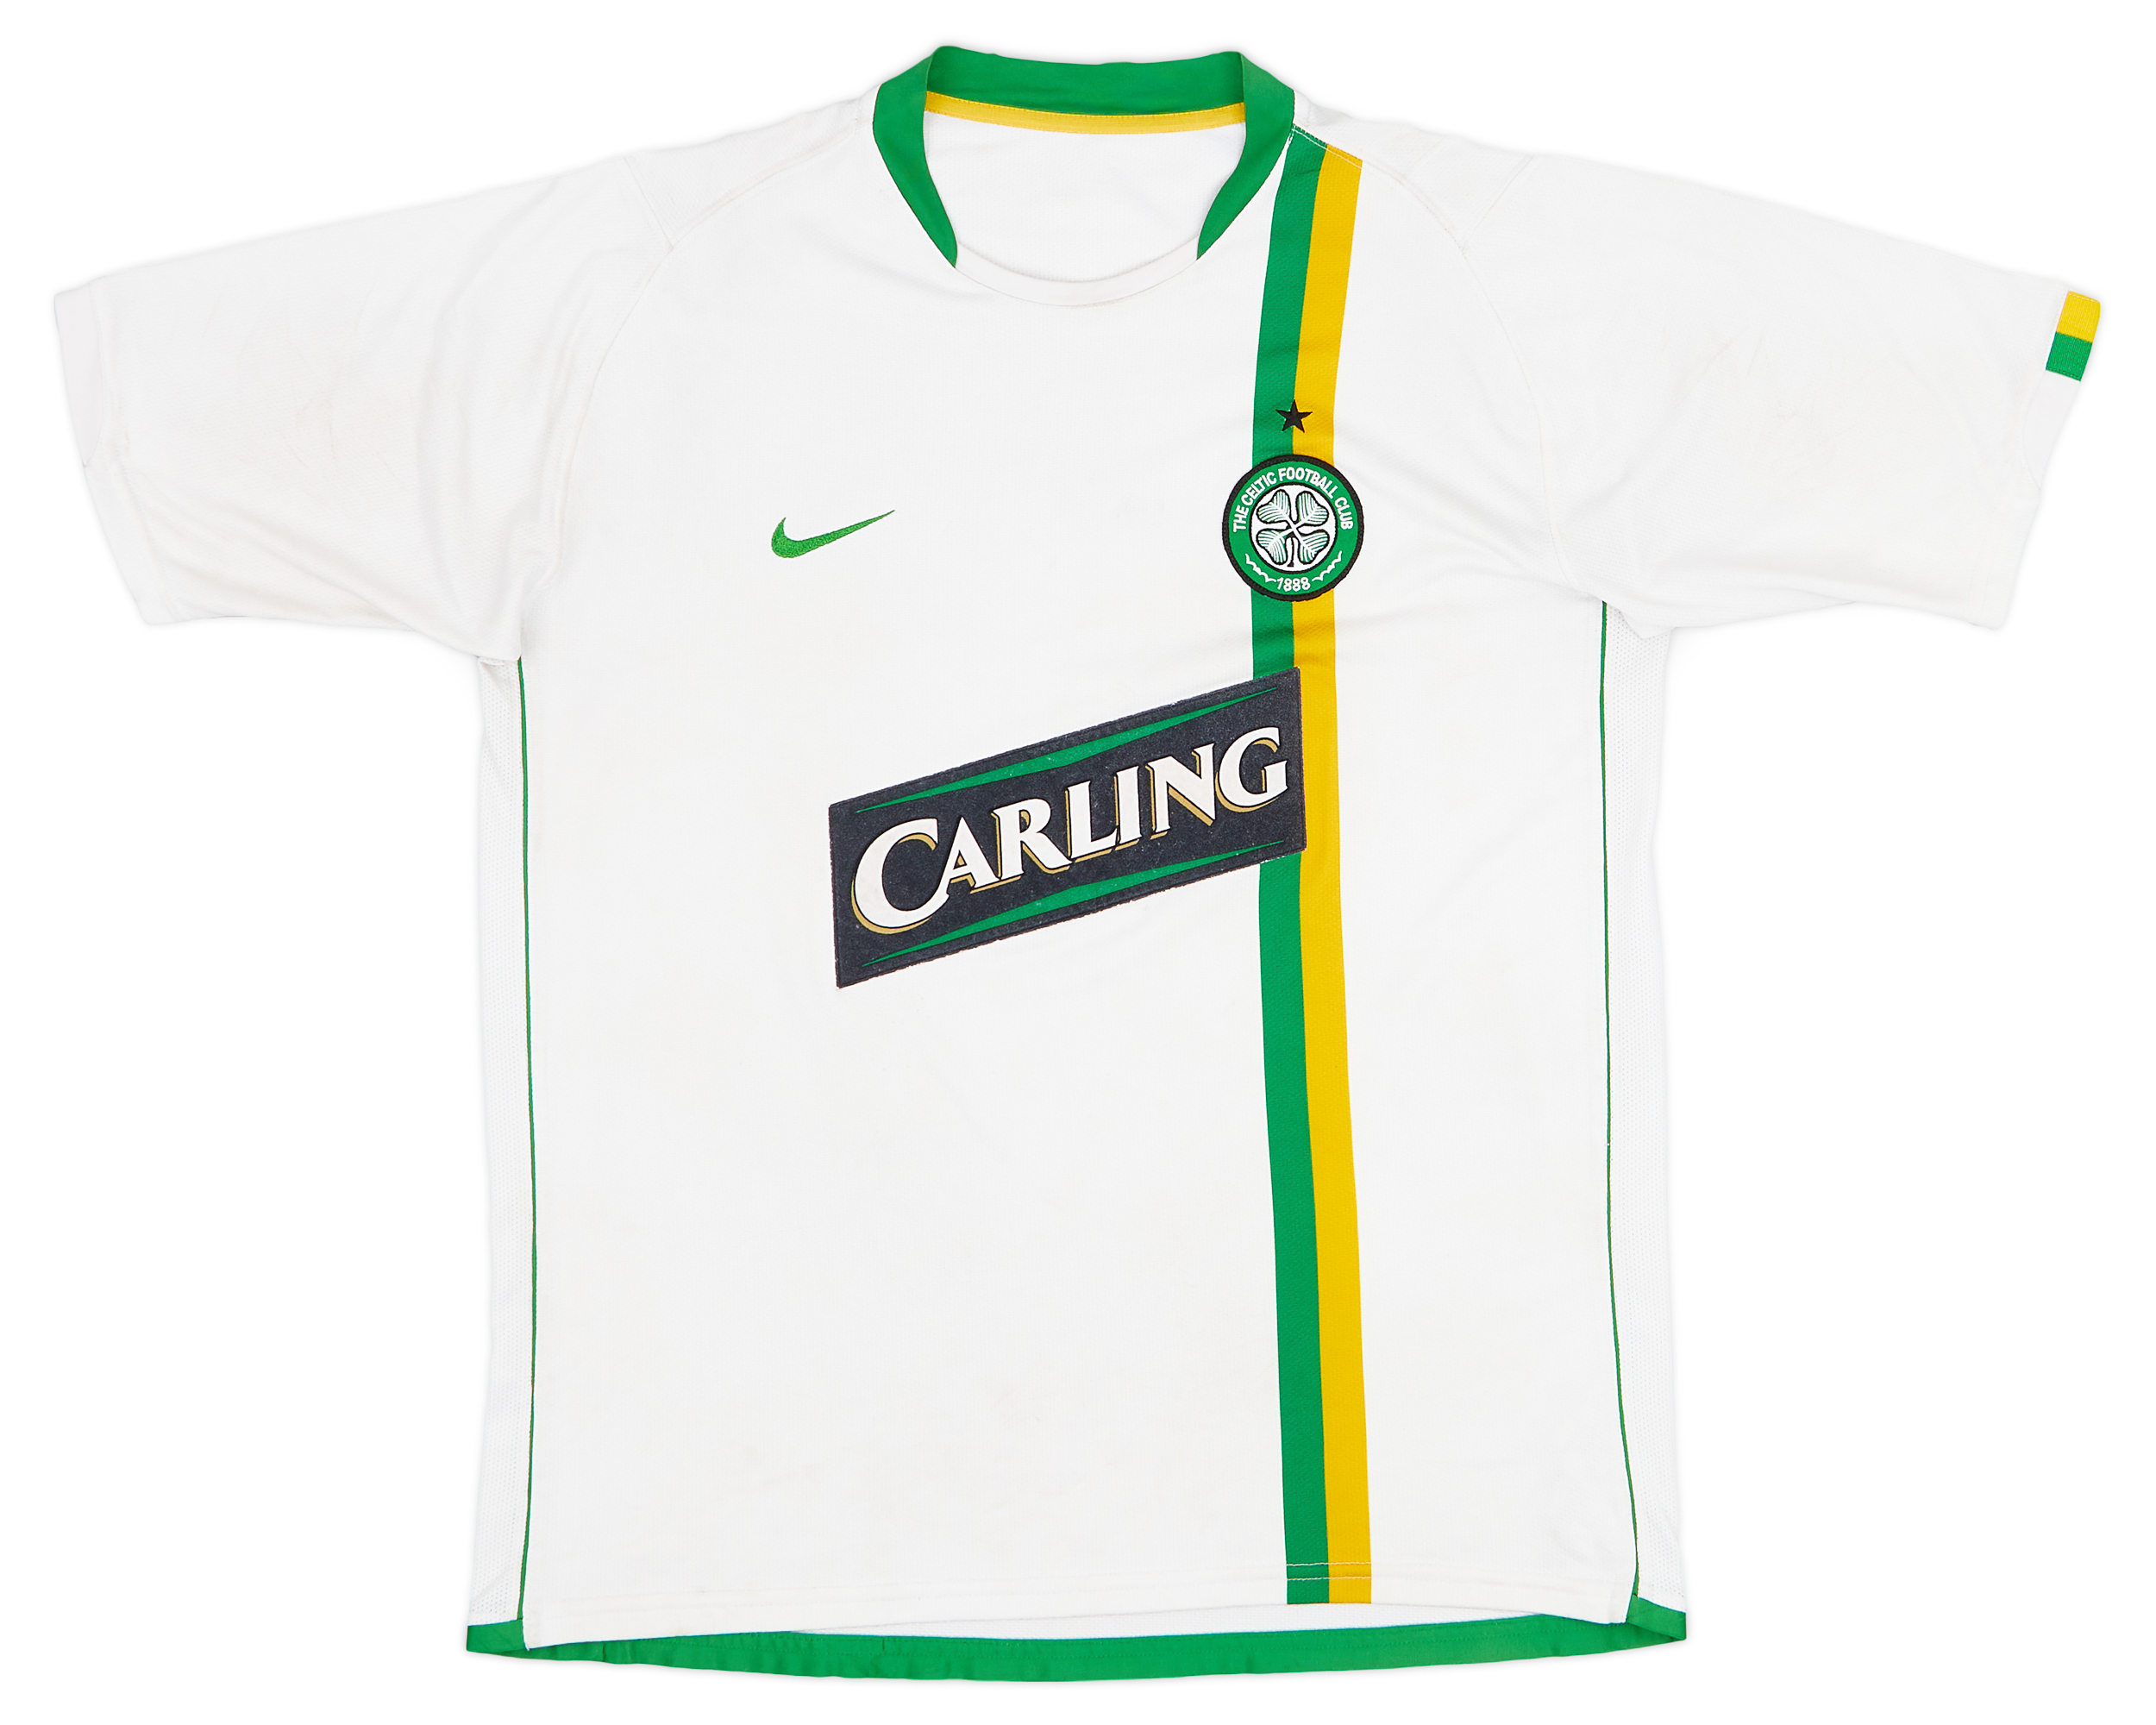 Celtic Home football shirt 2008 - 2010. Sponsored by Carling